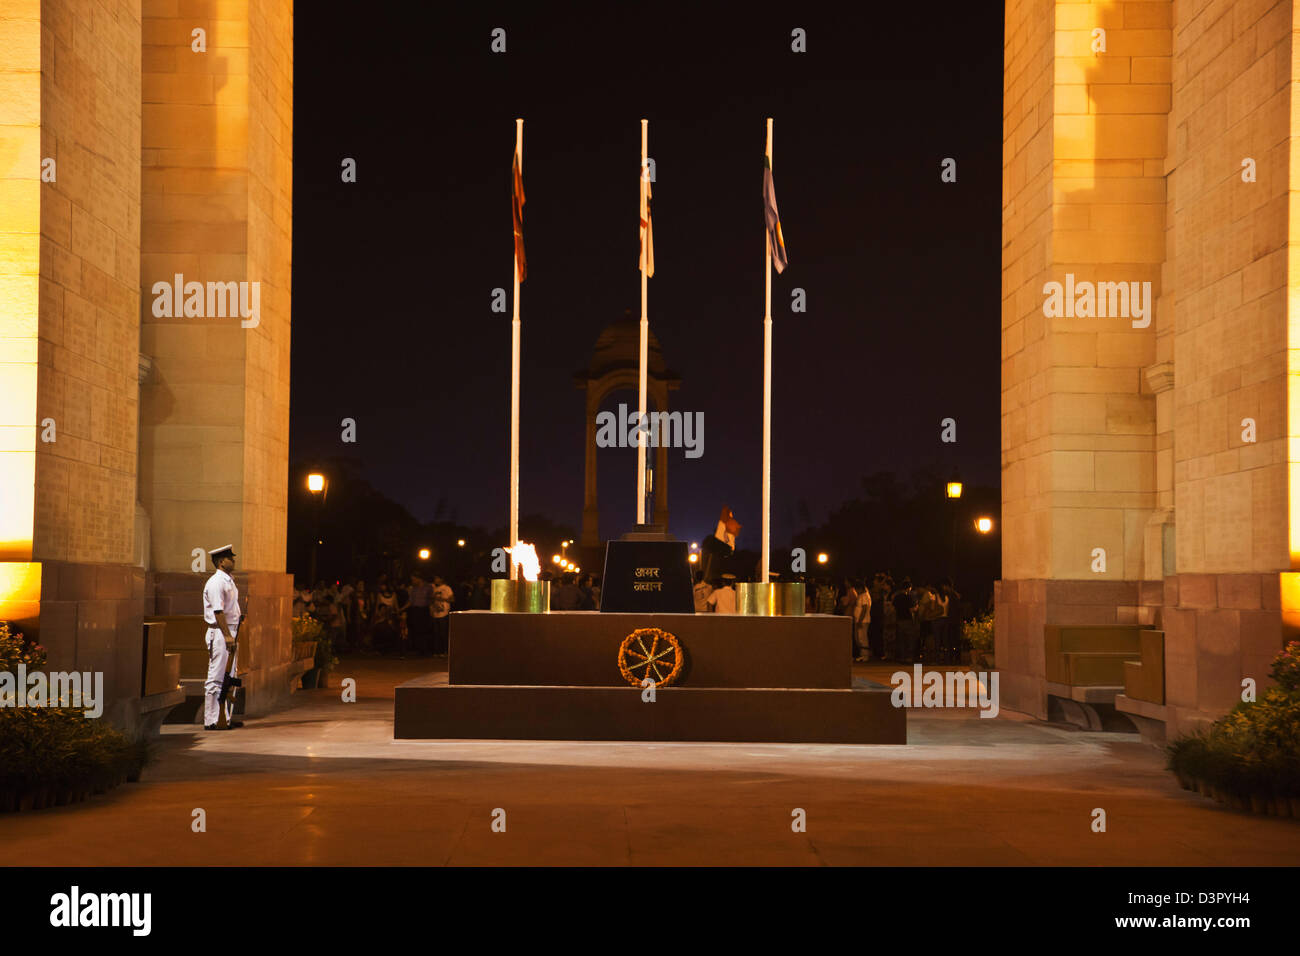 View of Amar Jawan Jyoti at India Gate in New Delhi It is an Indian  News Photo  Getty Images